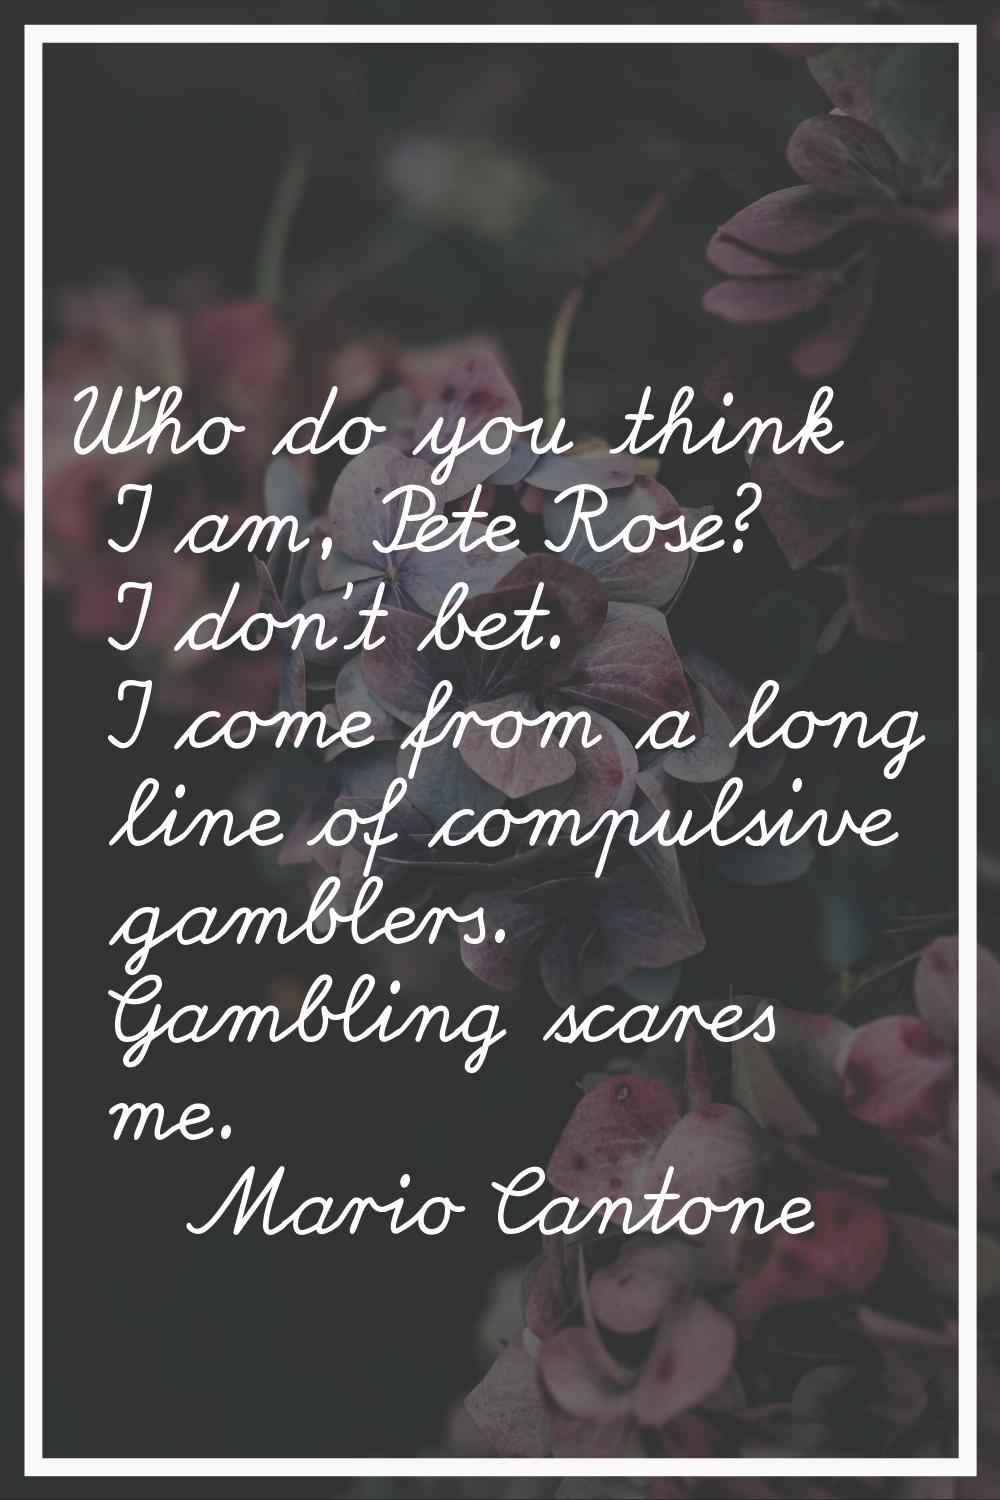 Who do you think I am, Pete Rose? I don't bet. I come from a long line of compulsive gamblers. Gamb